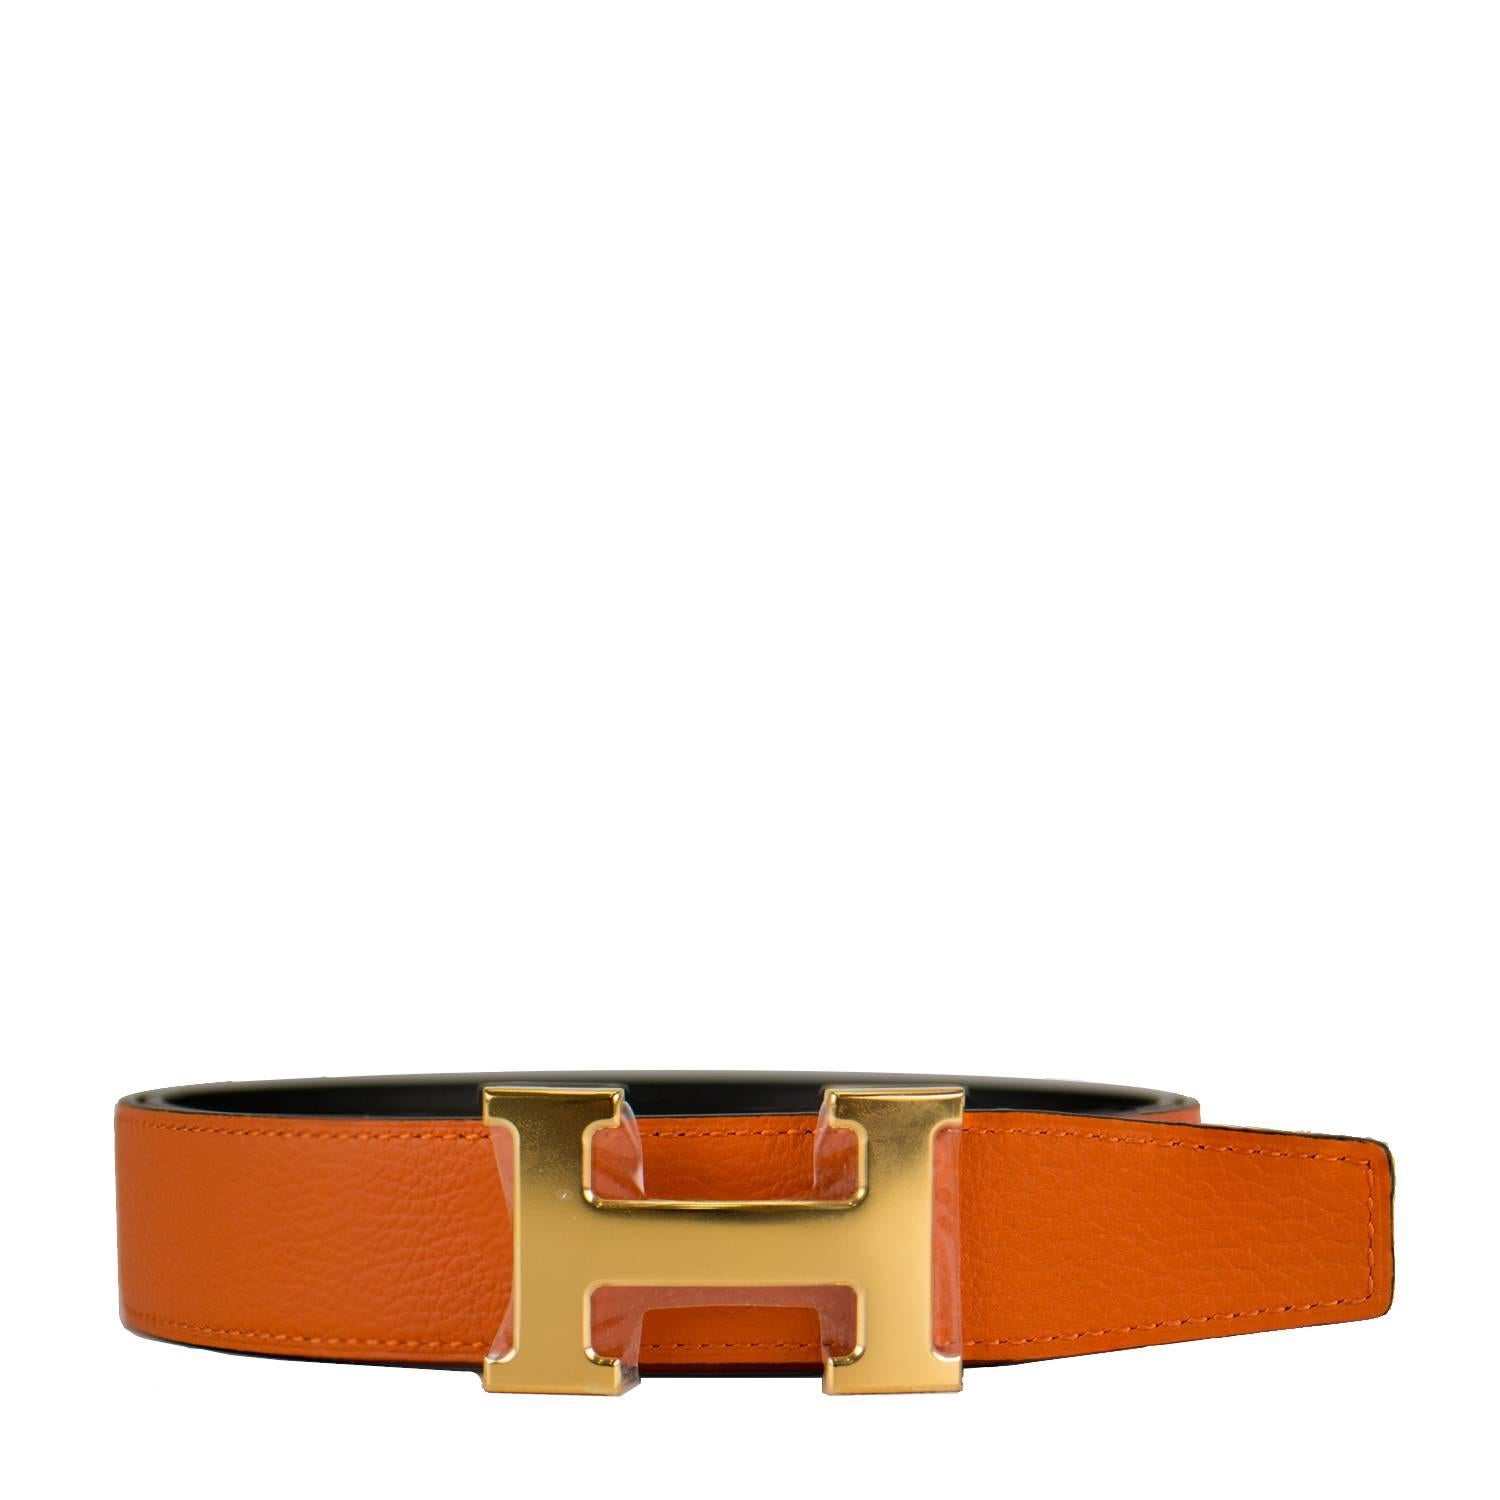 Hermes Belt H 32mm Box Togo Noir/Orange size 85 + Boucle Gold 2016

Pre-owned and never used

Bought it in hermes store in 2016.

Color:  Black/Orange.

Model: H.

Size: 85cm.

Details:
*Protective felt removed for purposes of